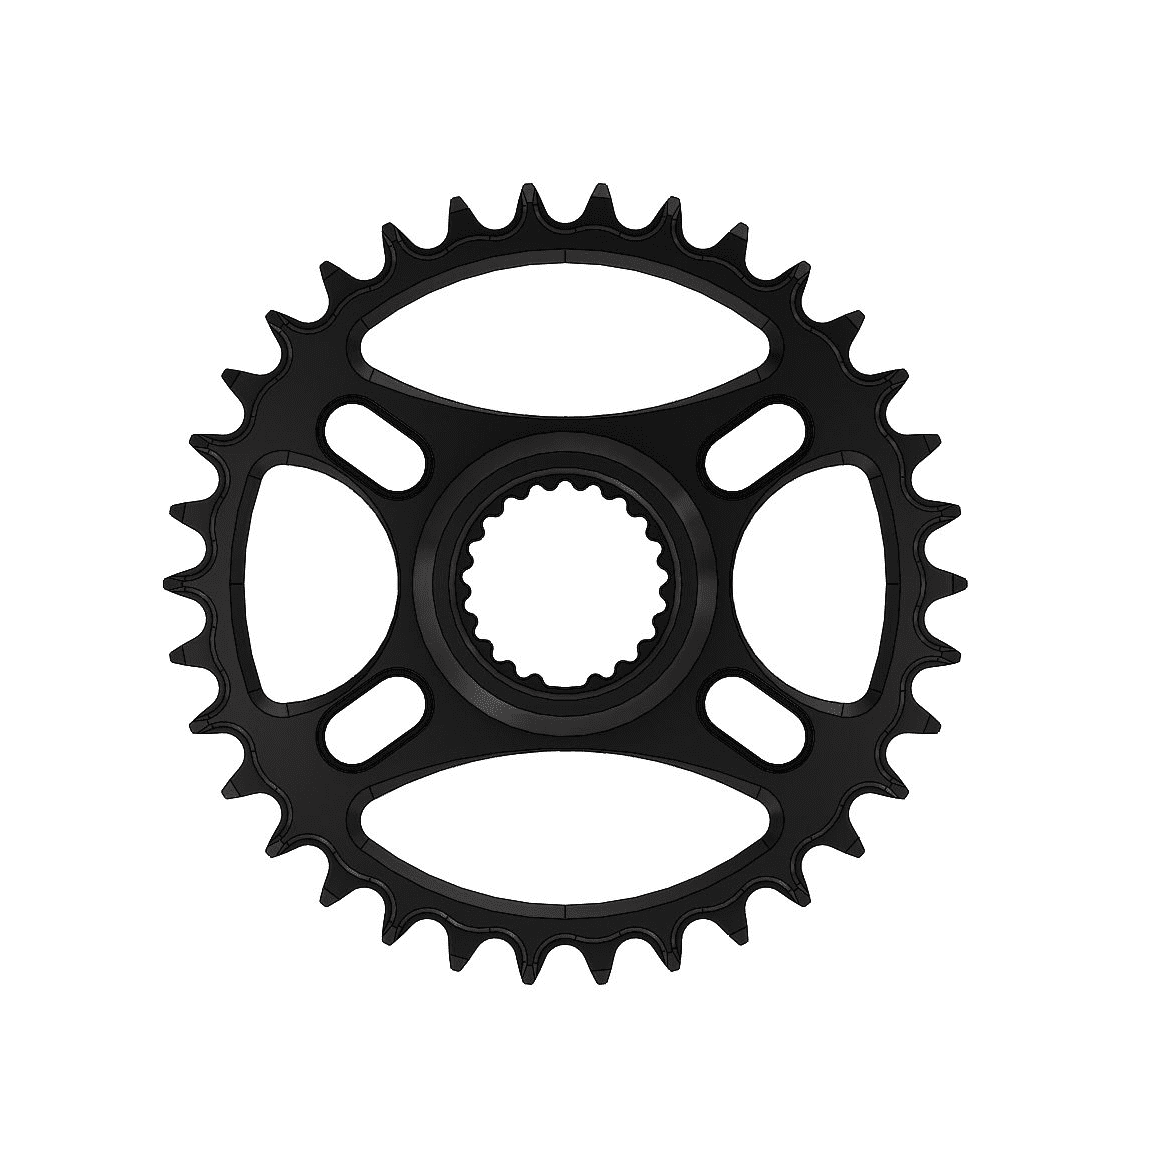 Pilo 34T Chainring For Shimano Cranks - Replacement Chain Ring